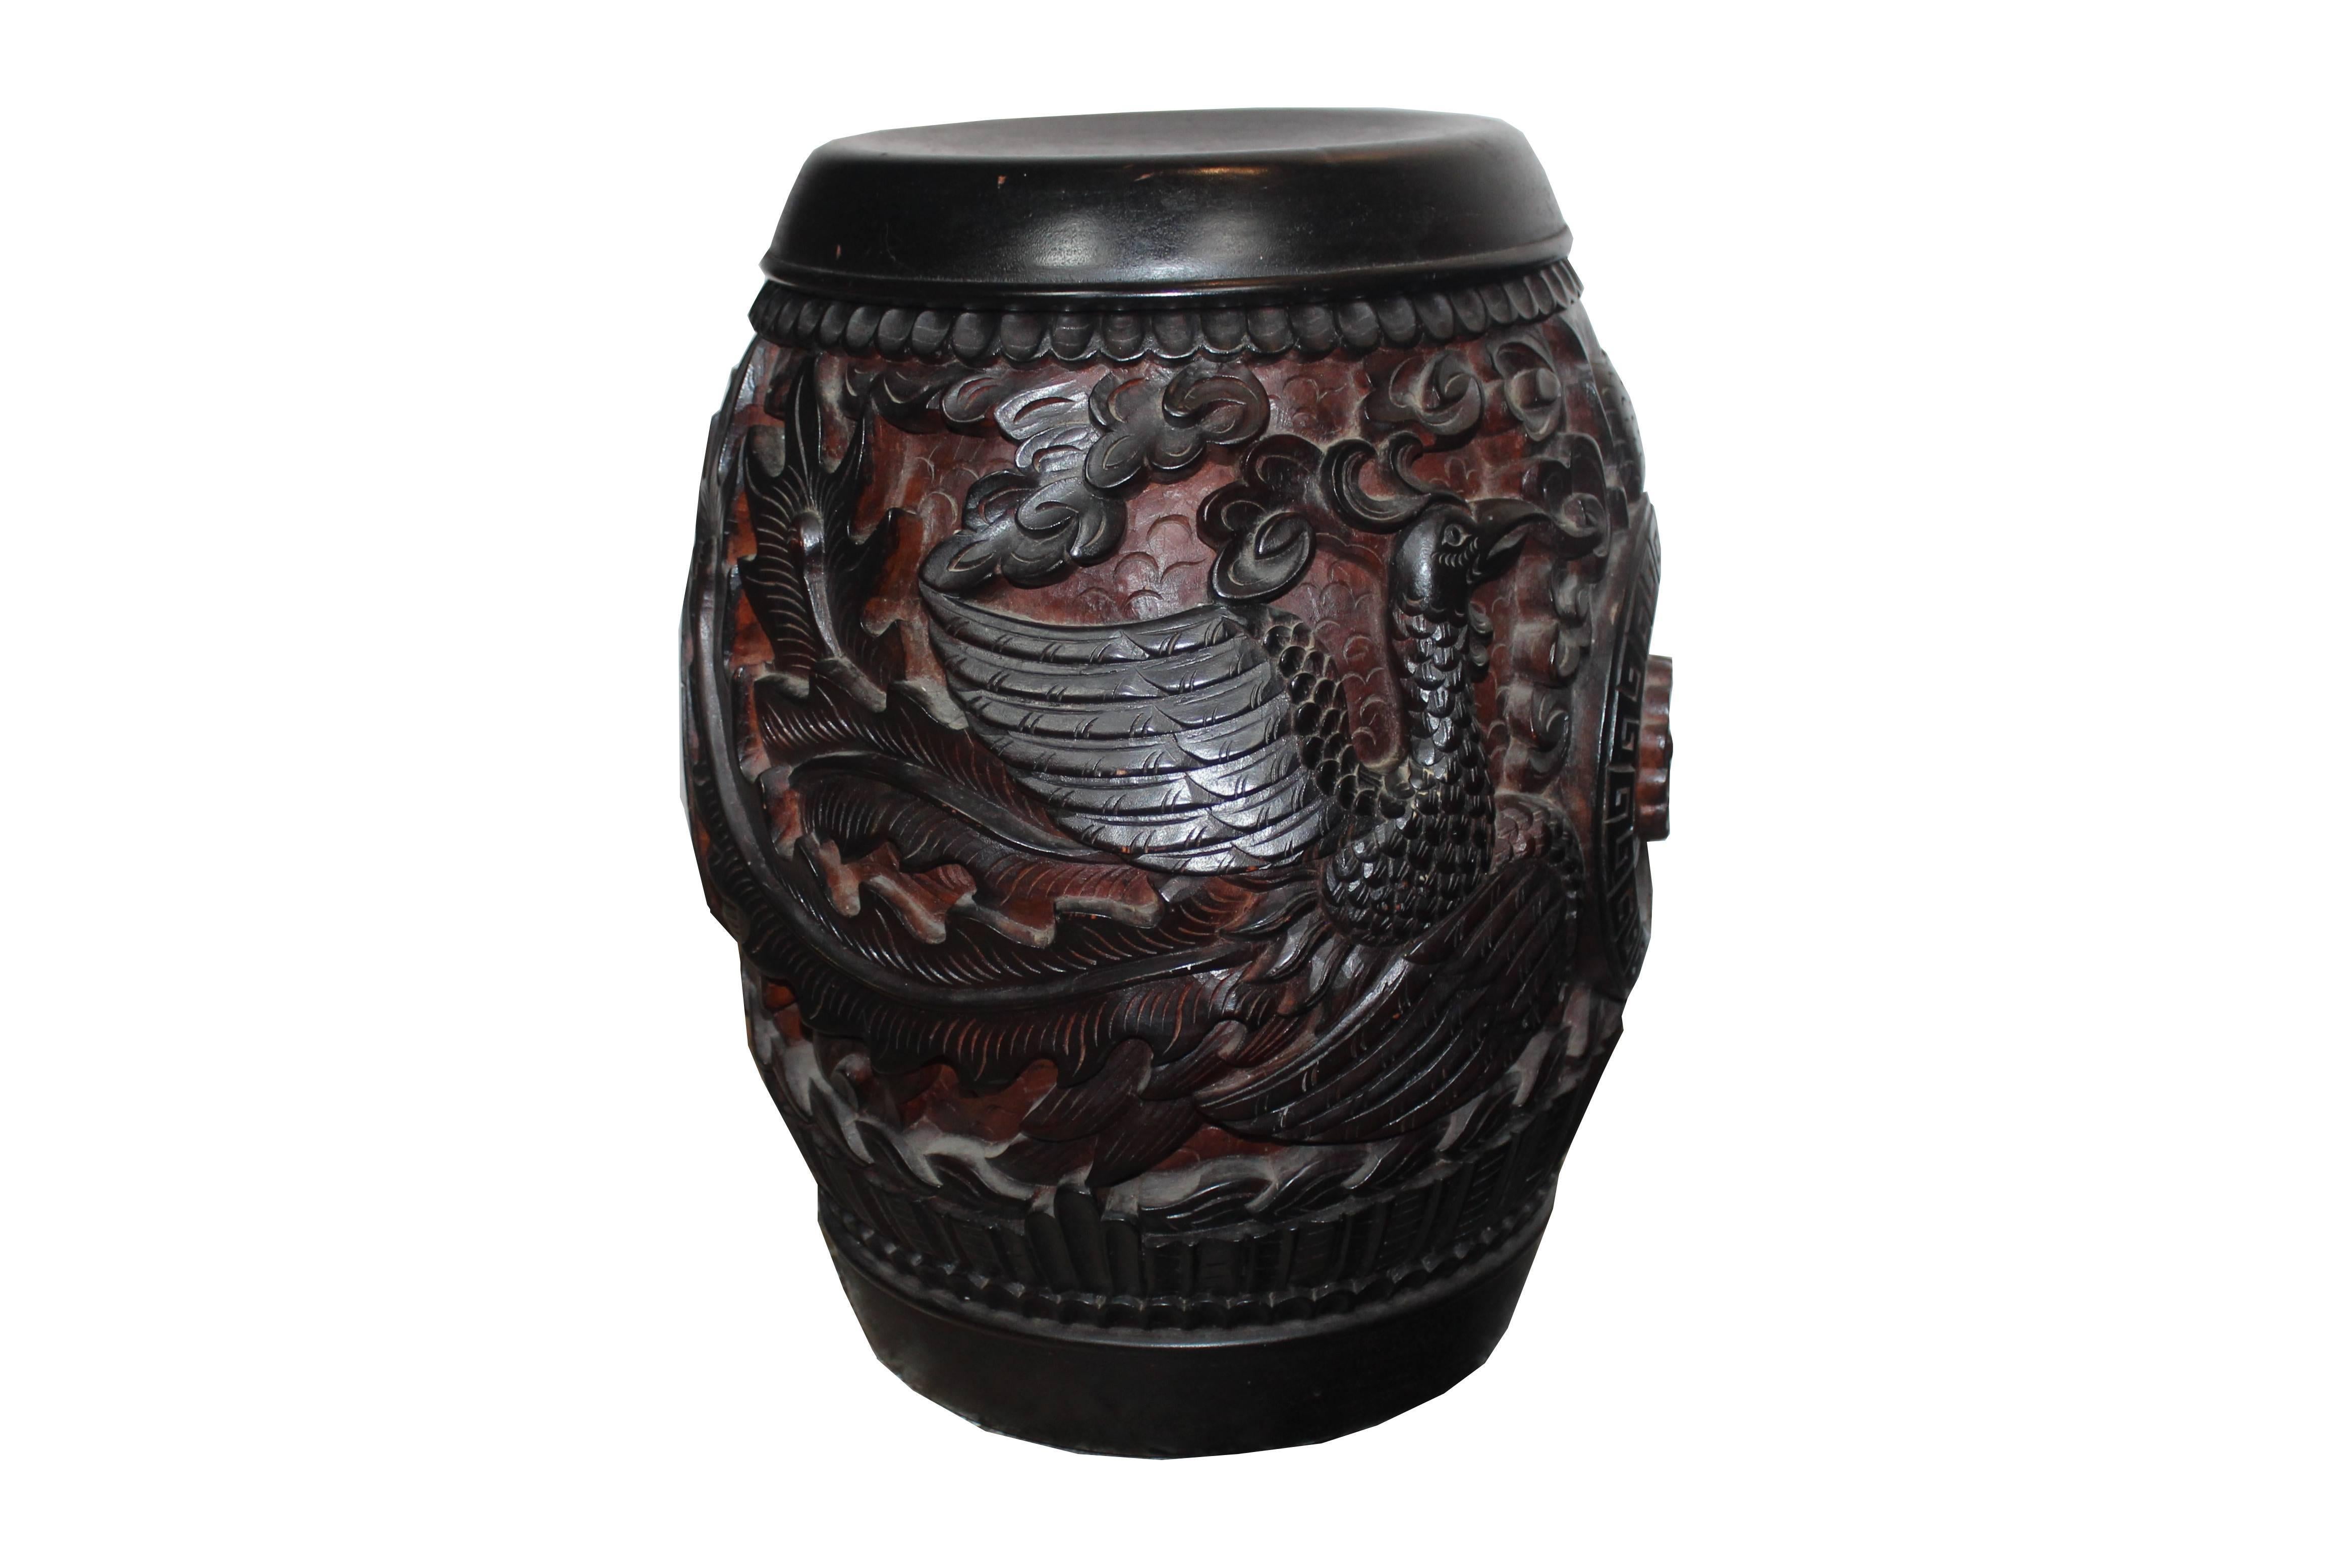 Solid wood hand carved Chinese stools. Finely carved in flowers, leafs, birds and dragons. One of the stool lid comes off 30